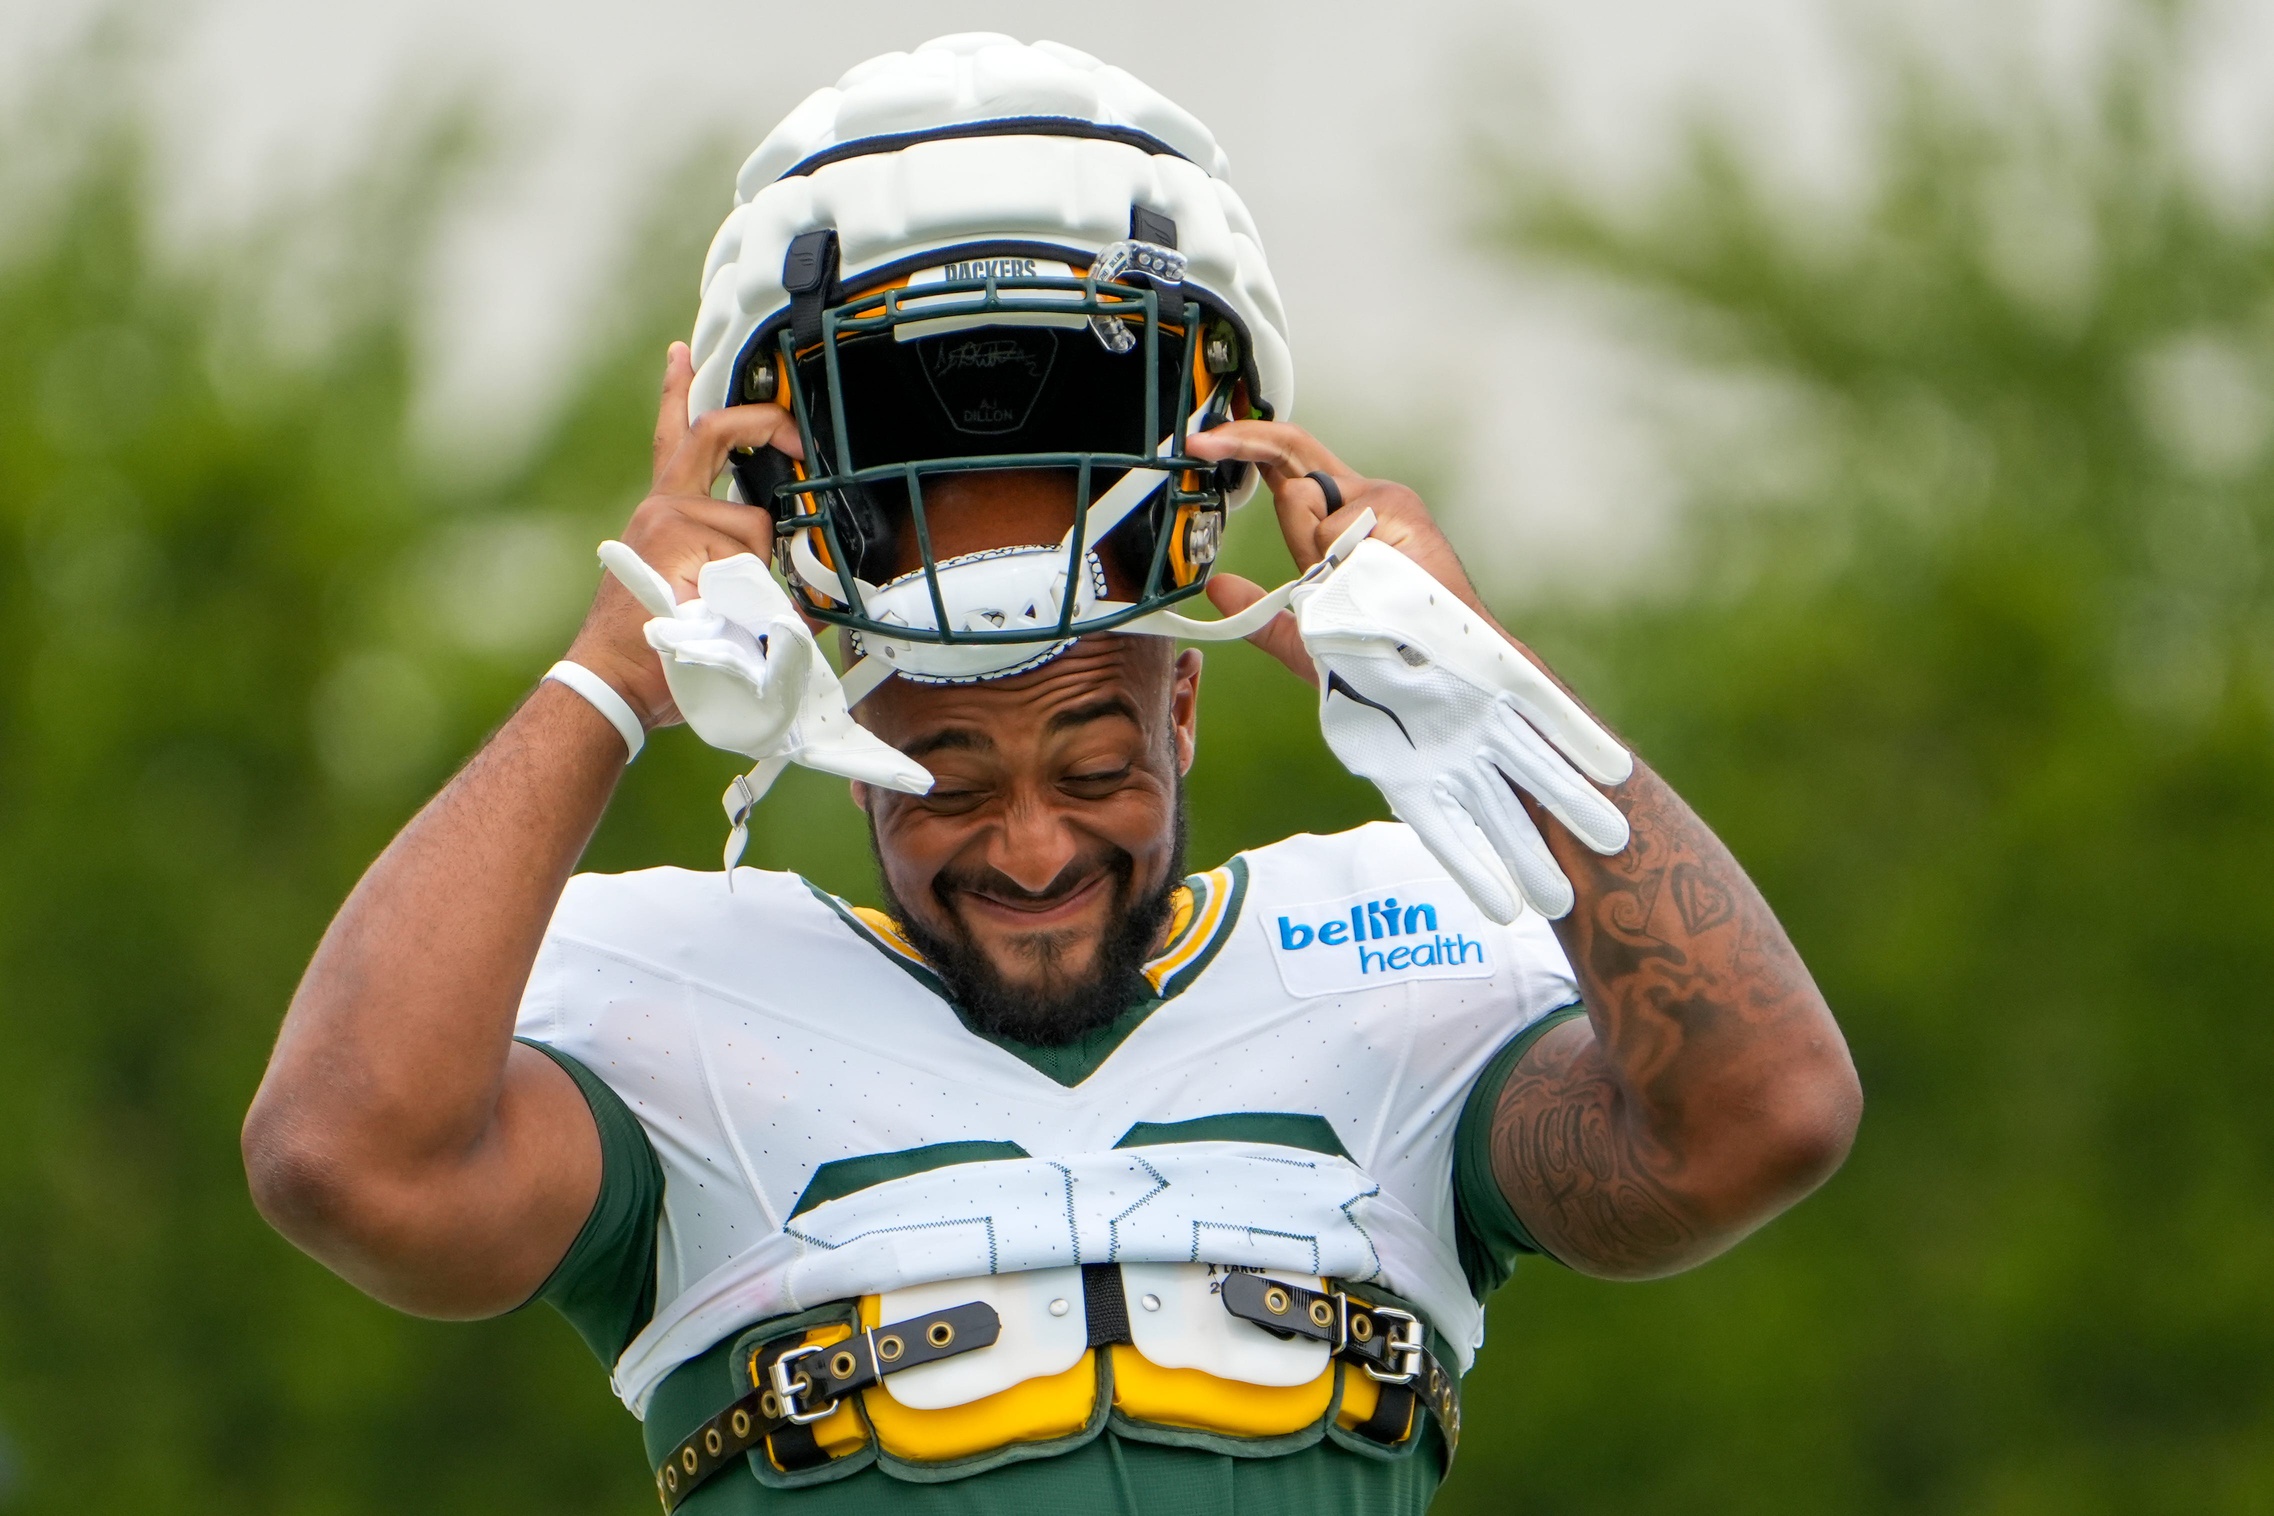 AJ Dillon (28) puts his helmet on during a joint practice between the Green Bay Packers and the Cincinnati Bengals.